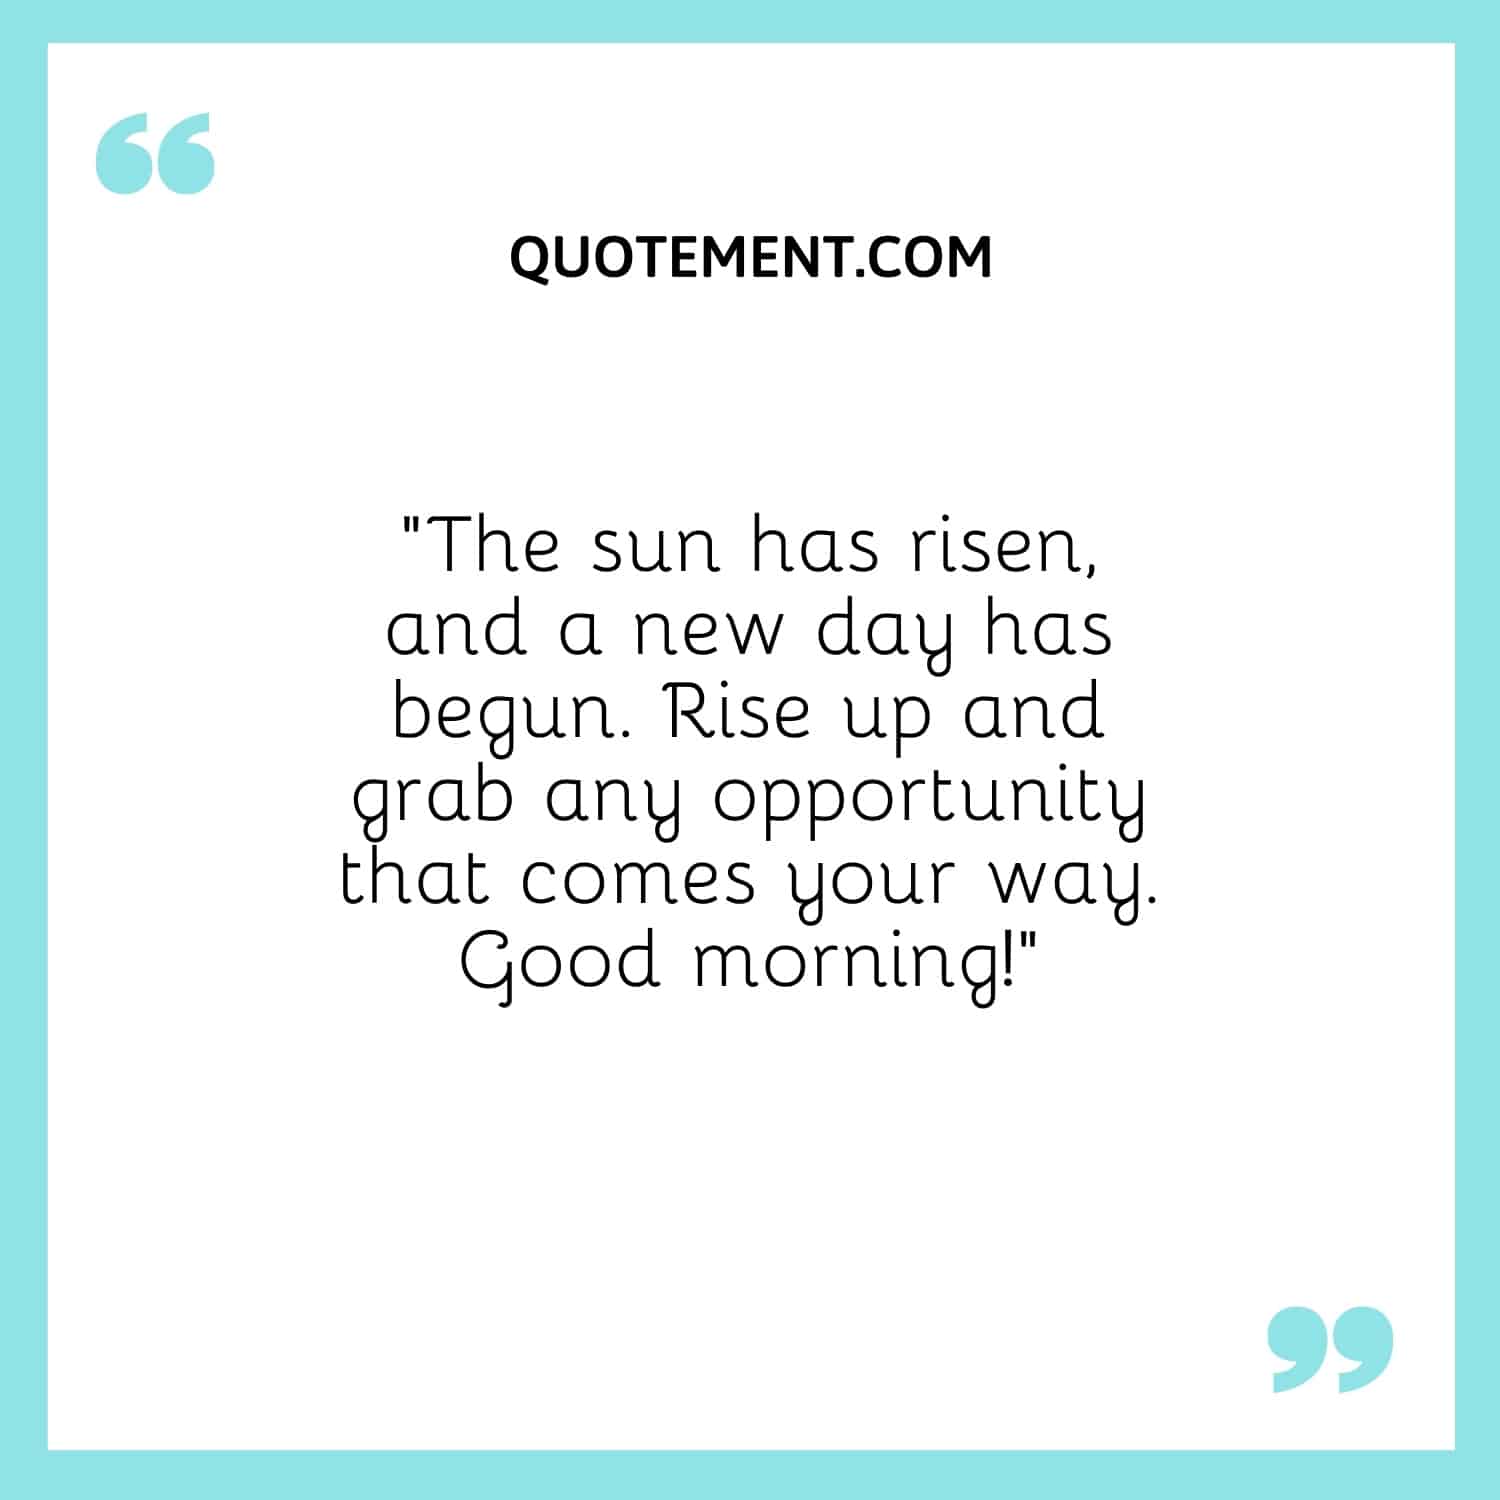 The sun has risen, and a new day has begun